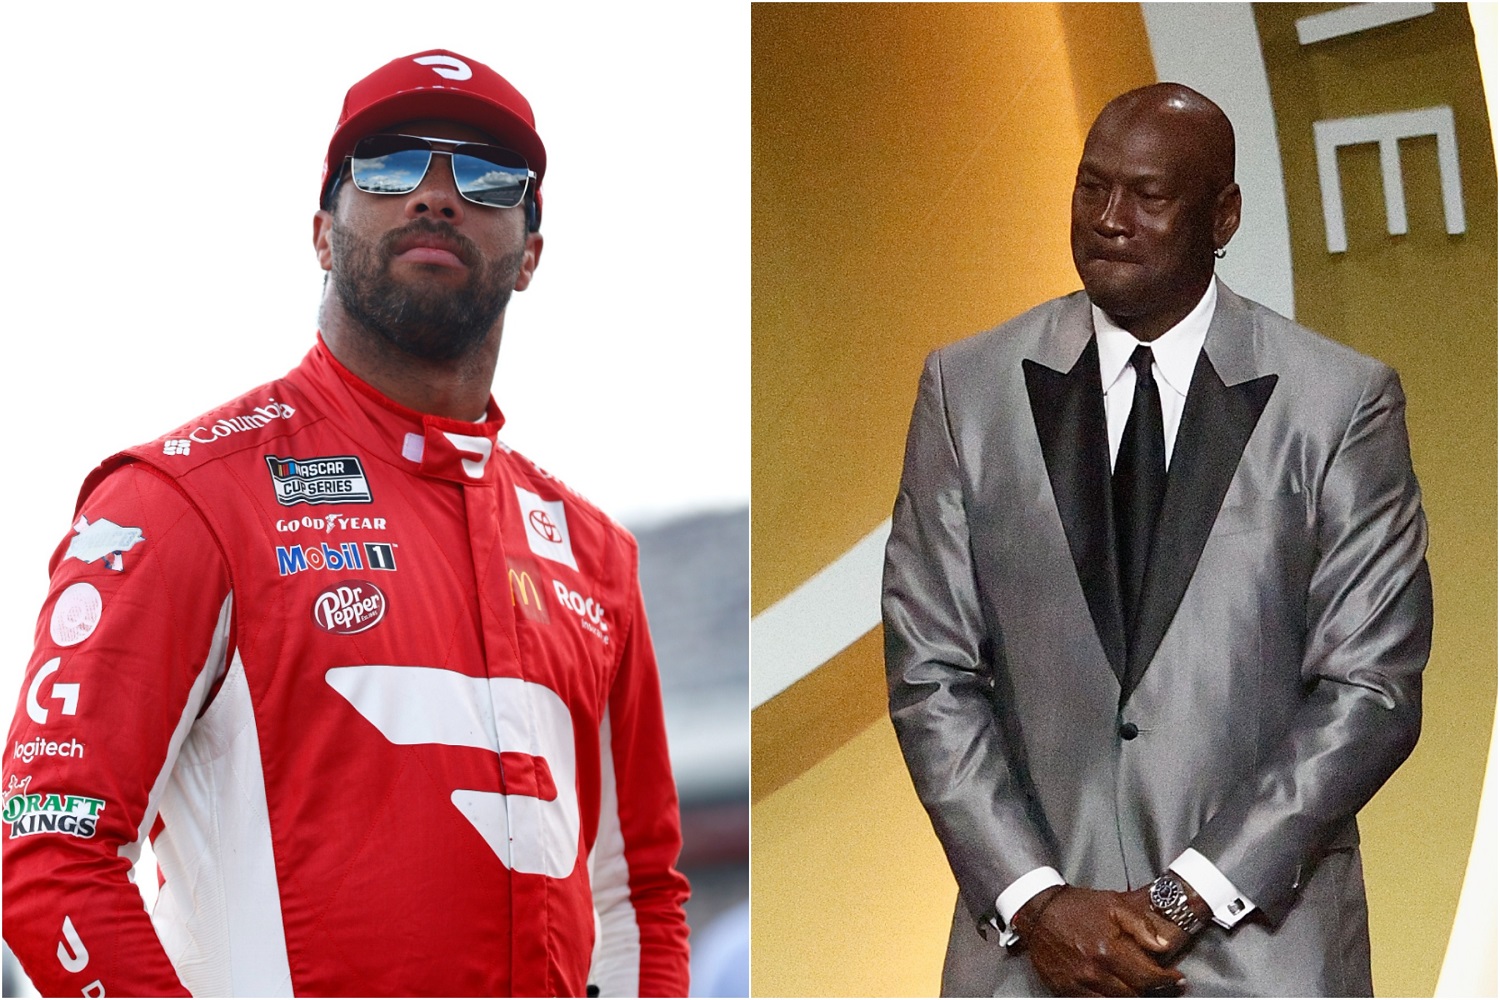 Fifth-year NSACAR Cup Series driver Bubba Wallace and 23XI Racing owner Michael Jordan.